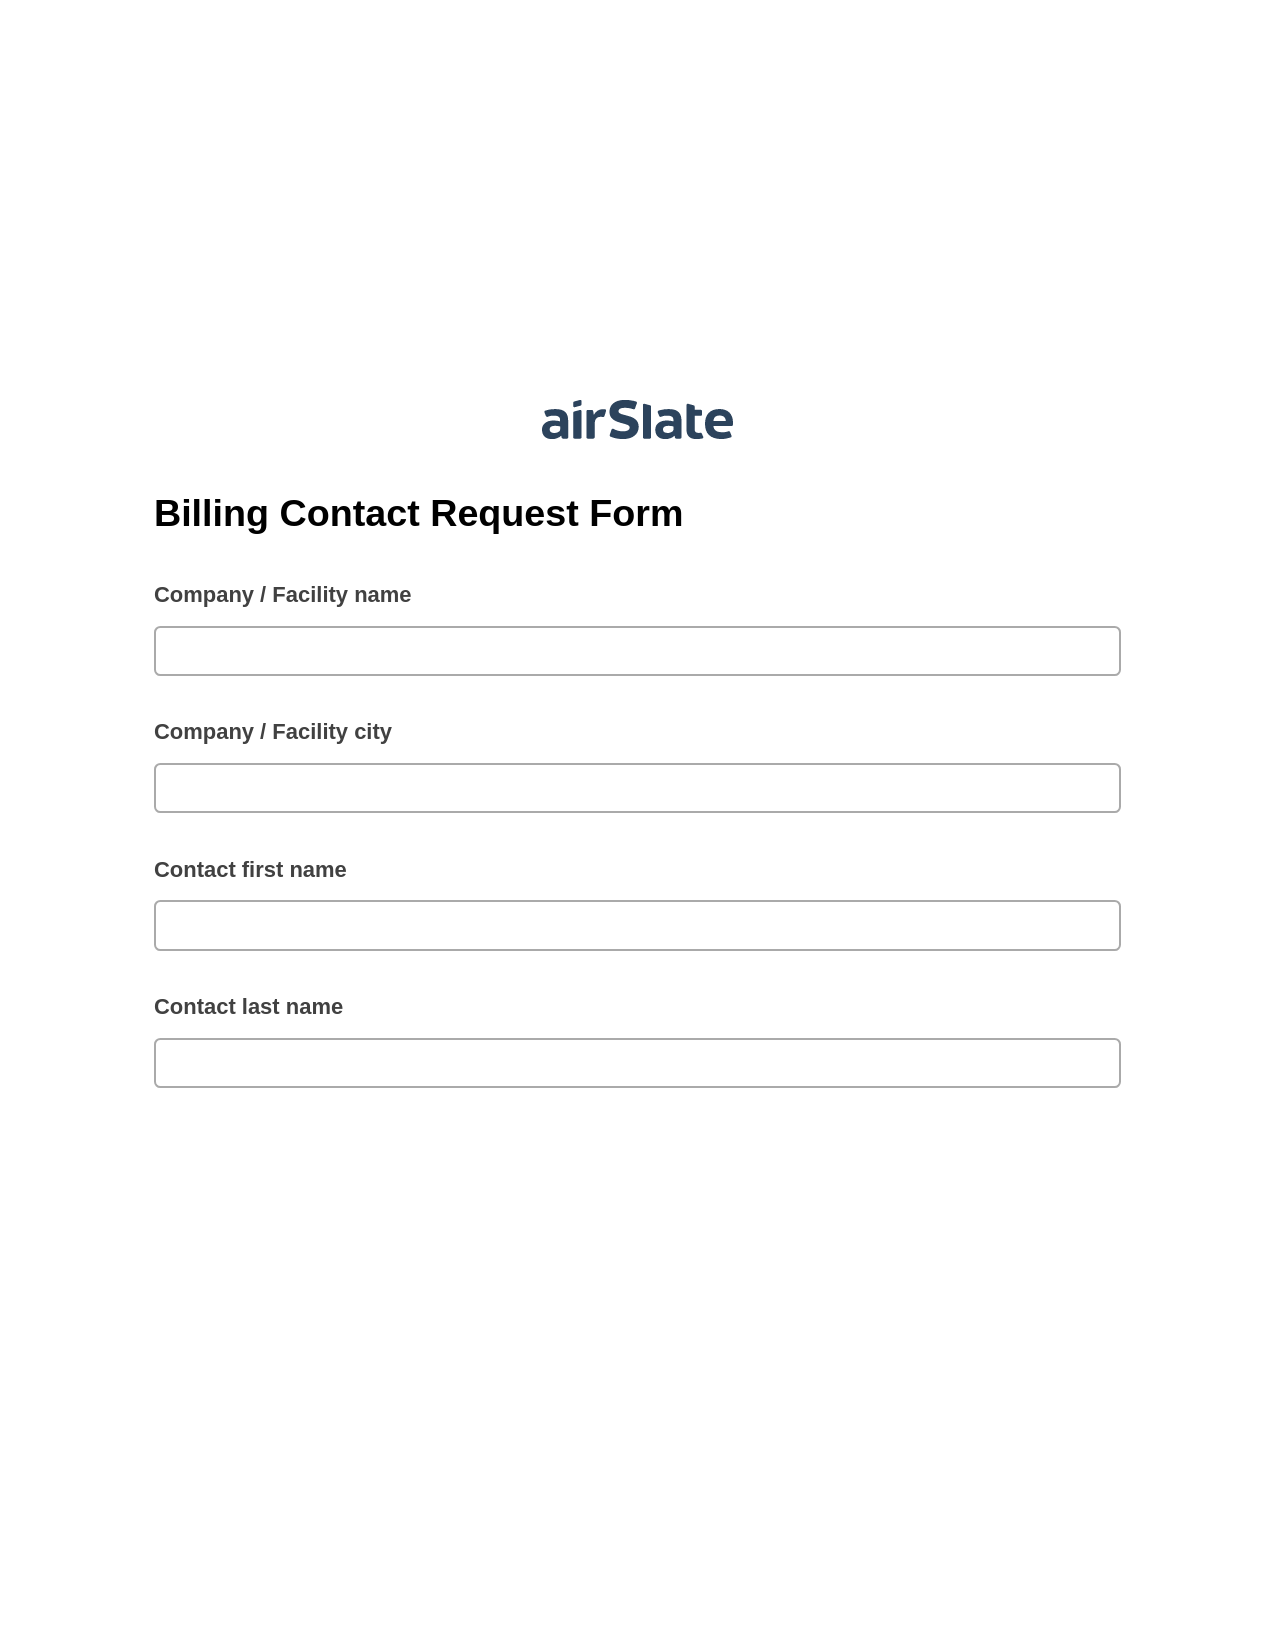 Billing Contact Request Form Pre-fill Dropdown from Airtable, Audit Trail Bot, Export to NetSuite Record Bot